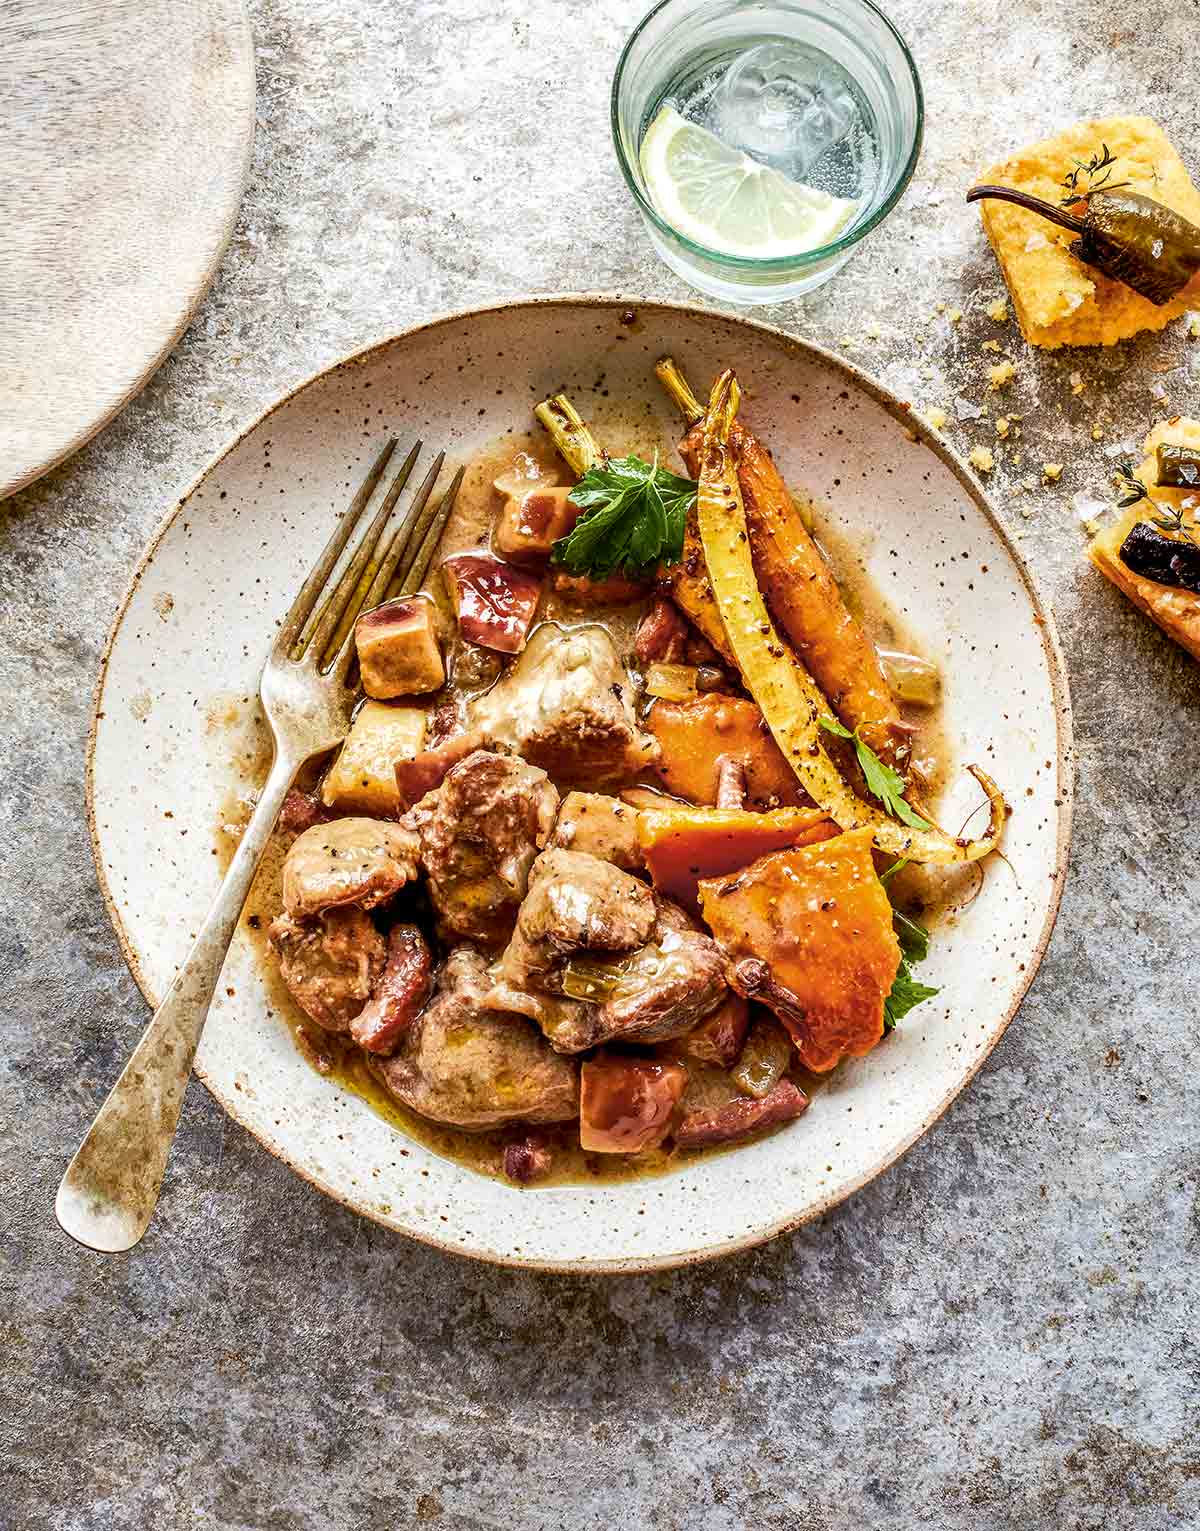 A white speckled bowl filled with pork casserole with apples and cider, roasted carrots, and a fork resting on the side.